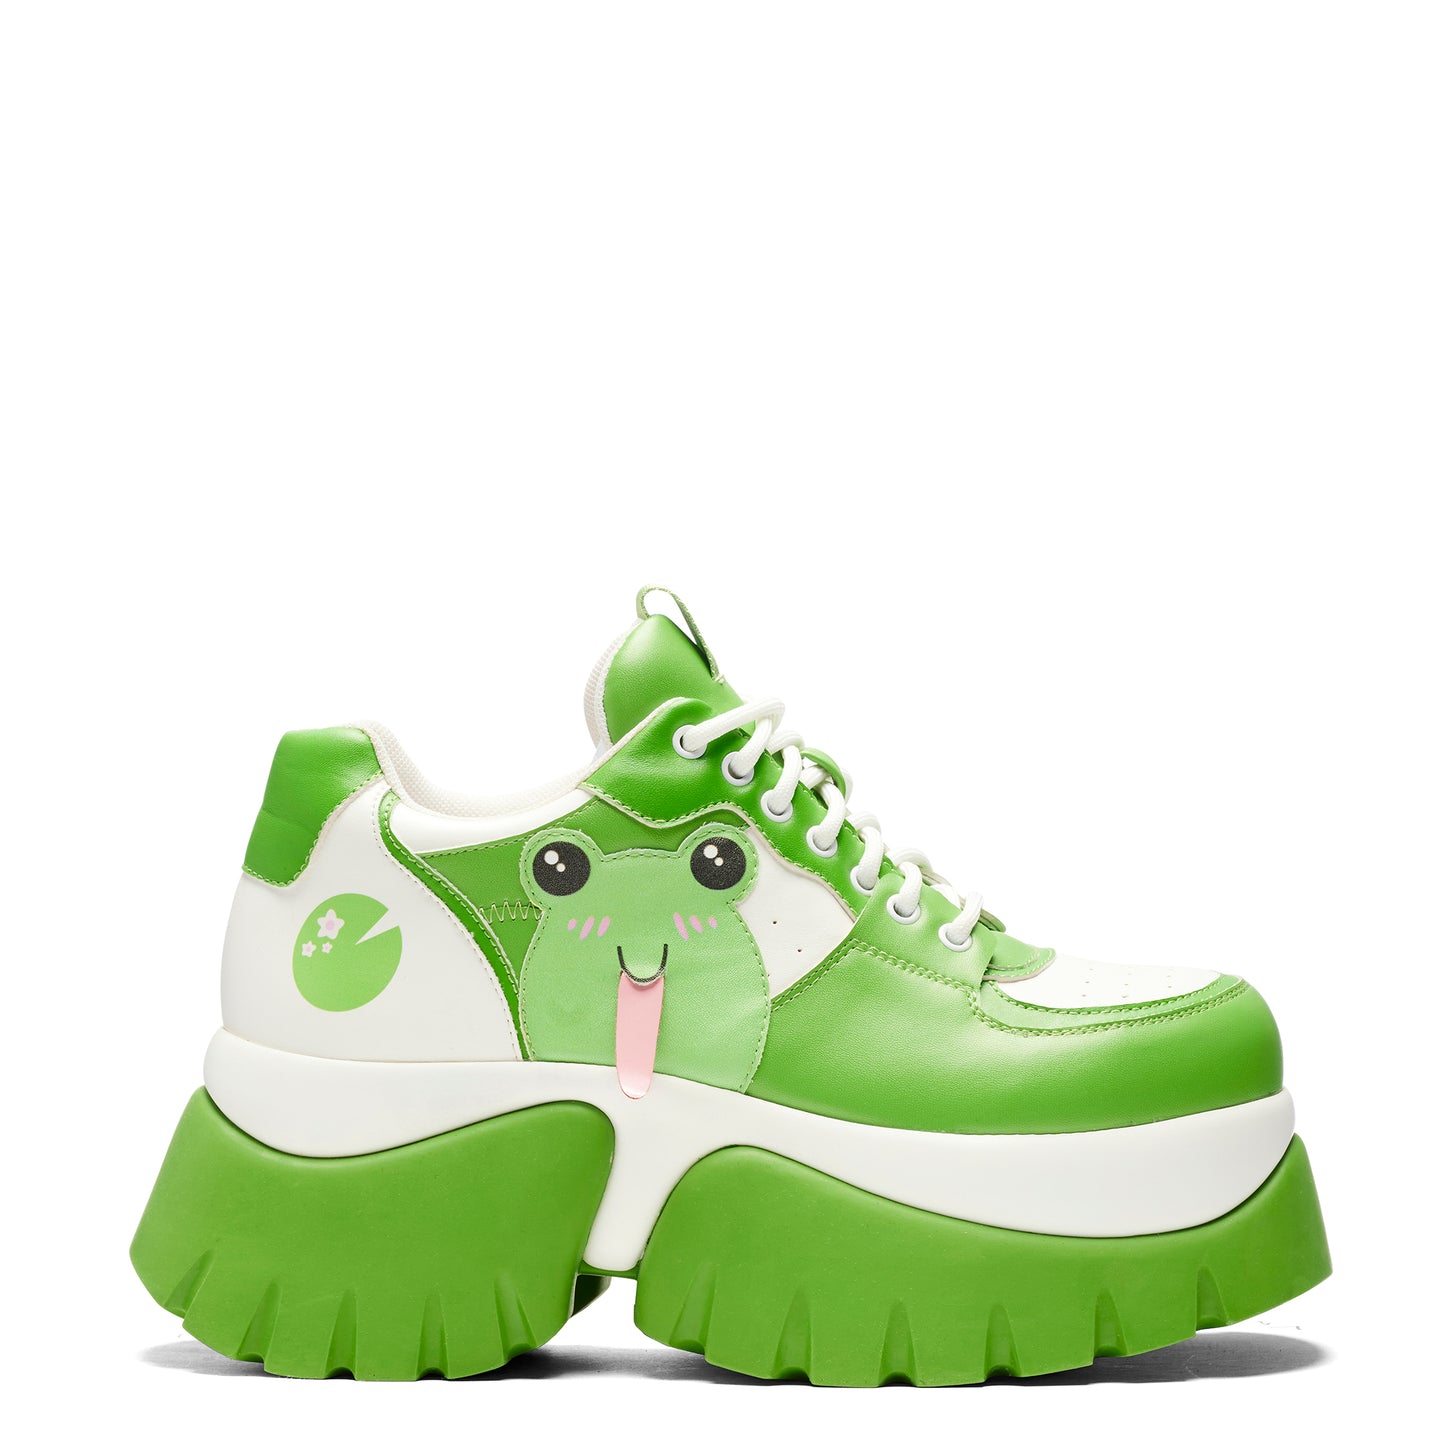 Fwoggy Woggy Says Hi Chunky Trainers - Green - Koi Footwear - Side View